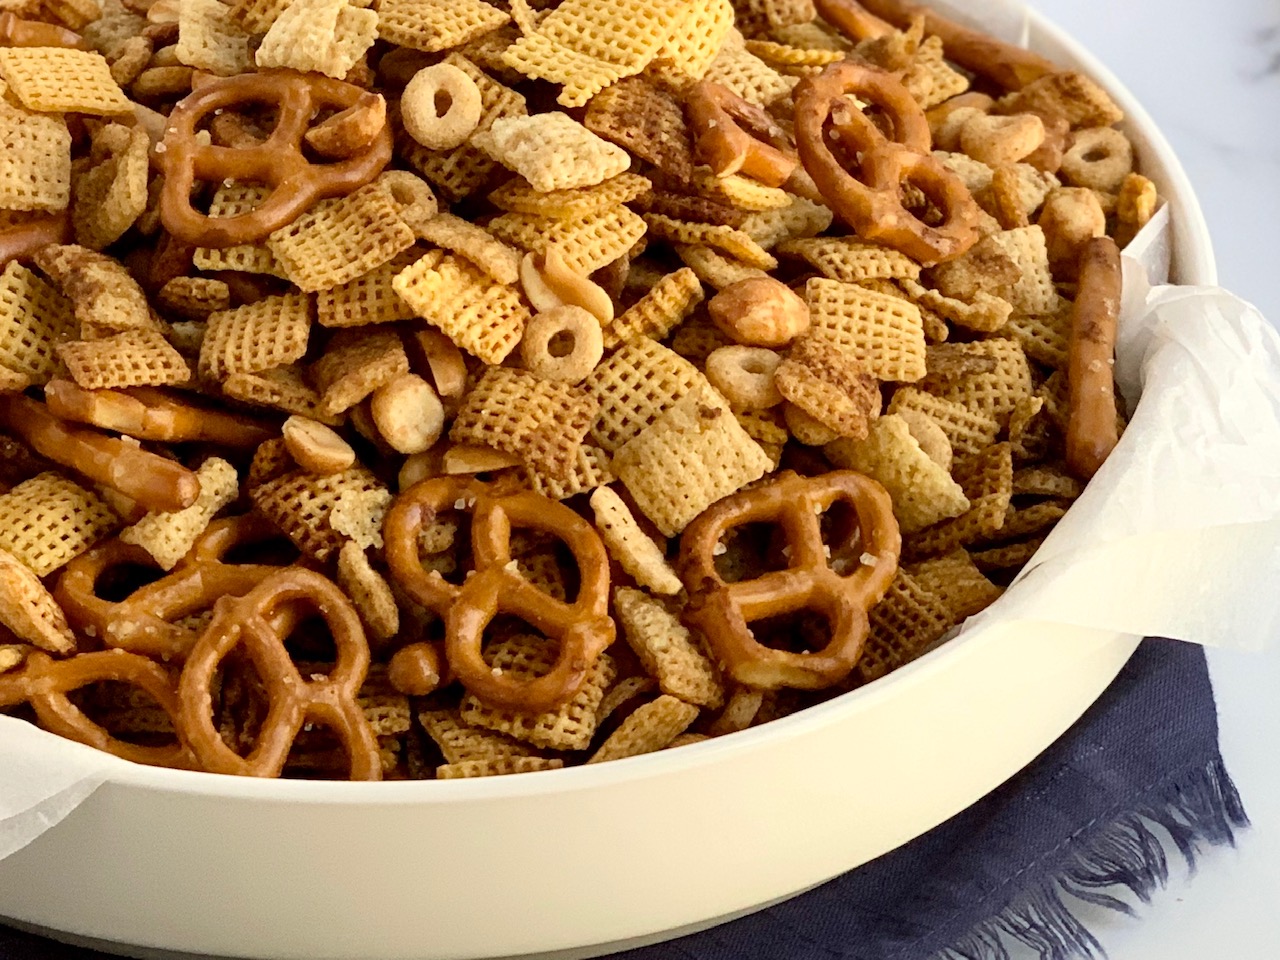 A white platter bowl full of pretzel rods, twists, peanuts, Chex cereal, seasonings, and Whole O's cereal.